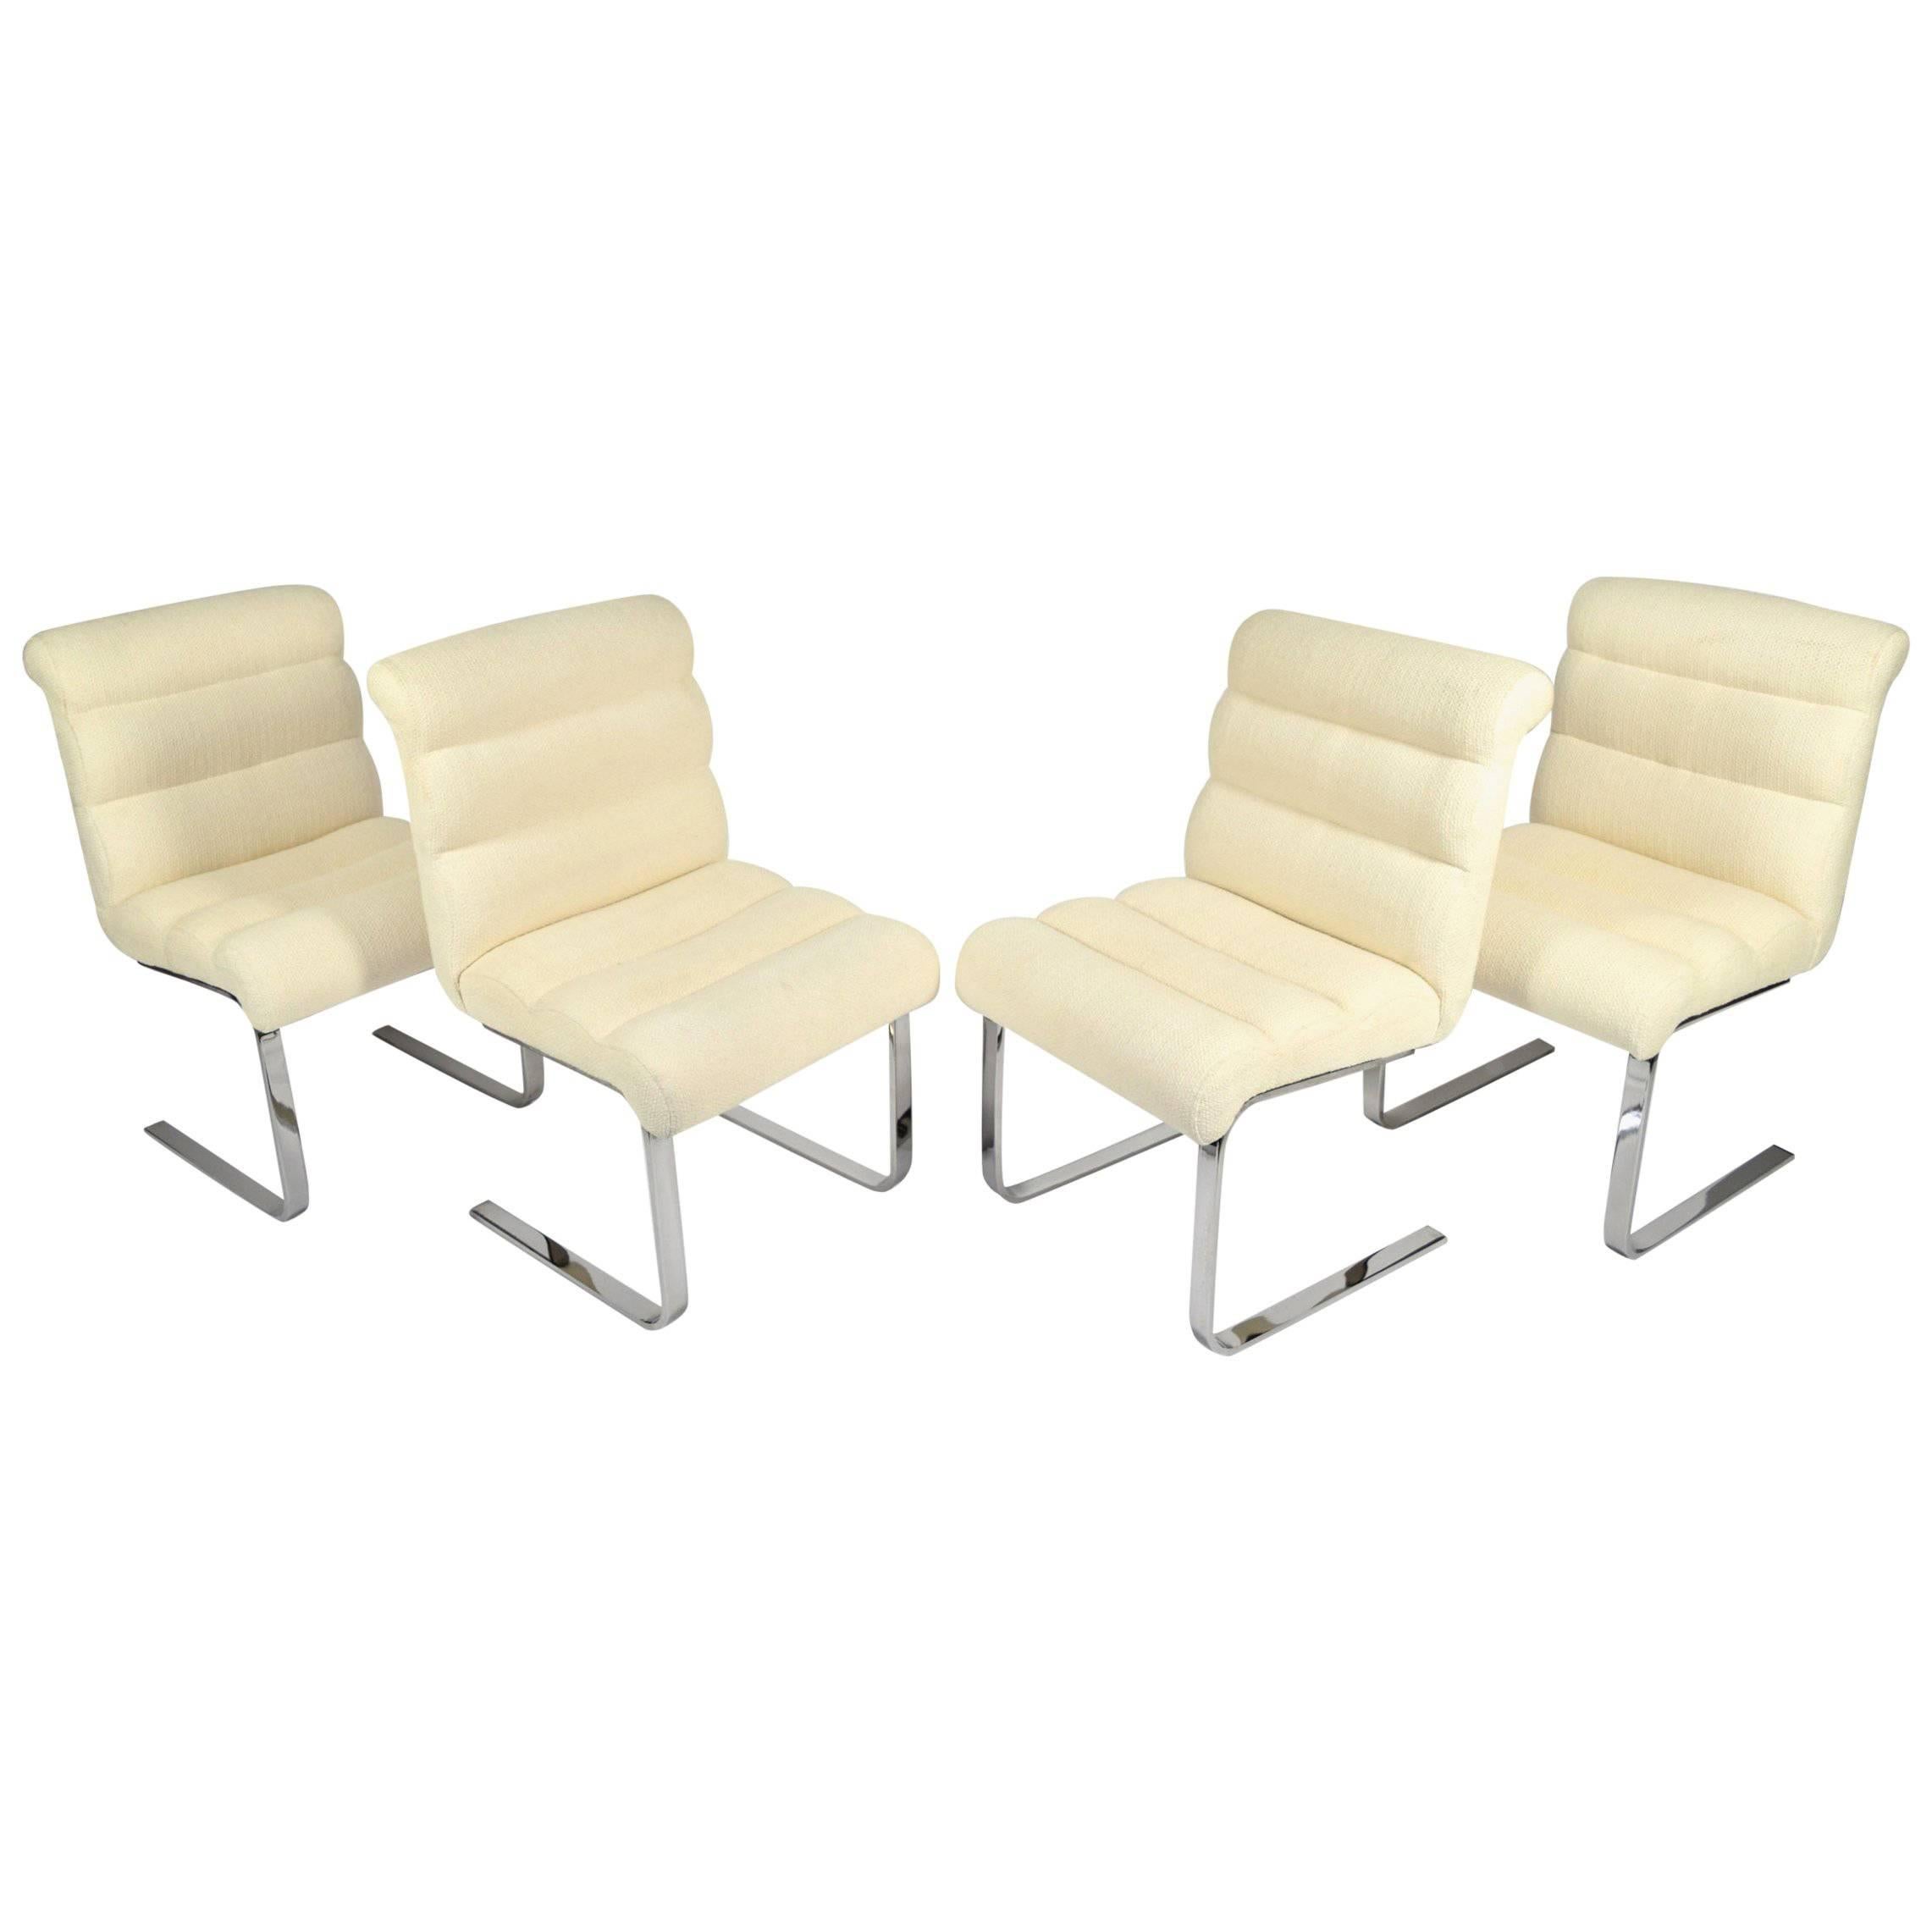 Set of Four "Lugano" Chairs by Mariani for Pace